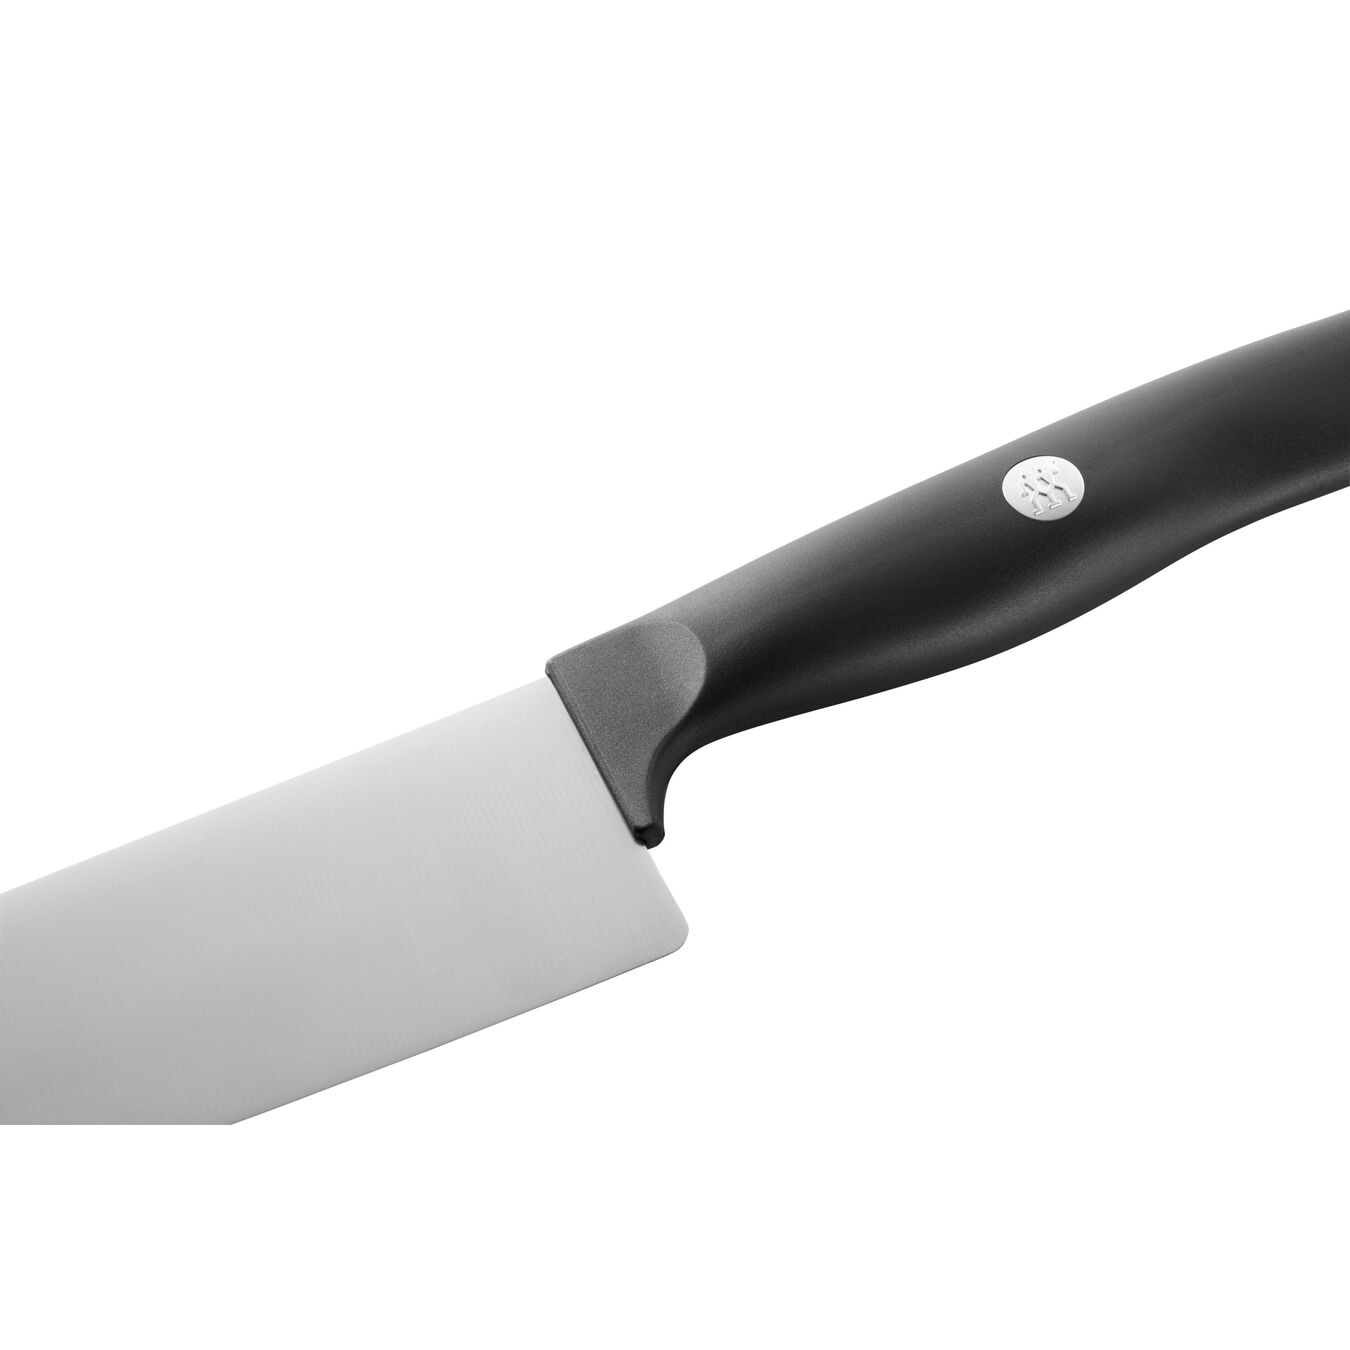 8-inch, Chef's knife - Visual Imperfections,,large 3